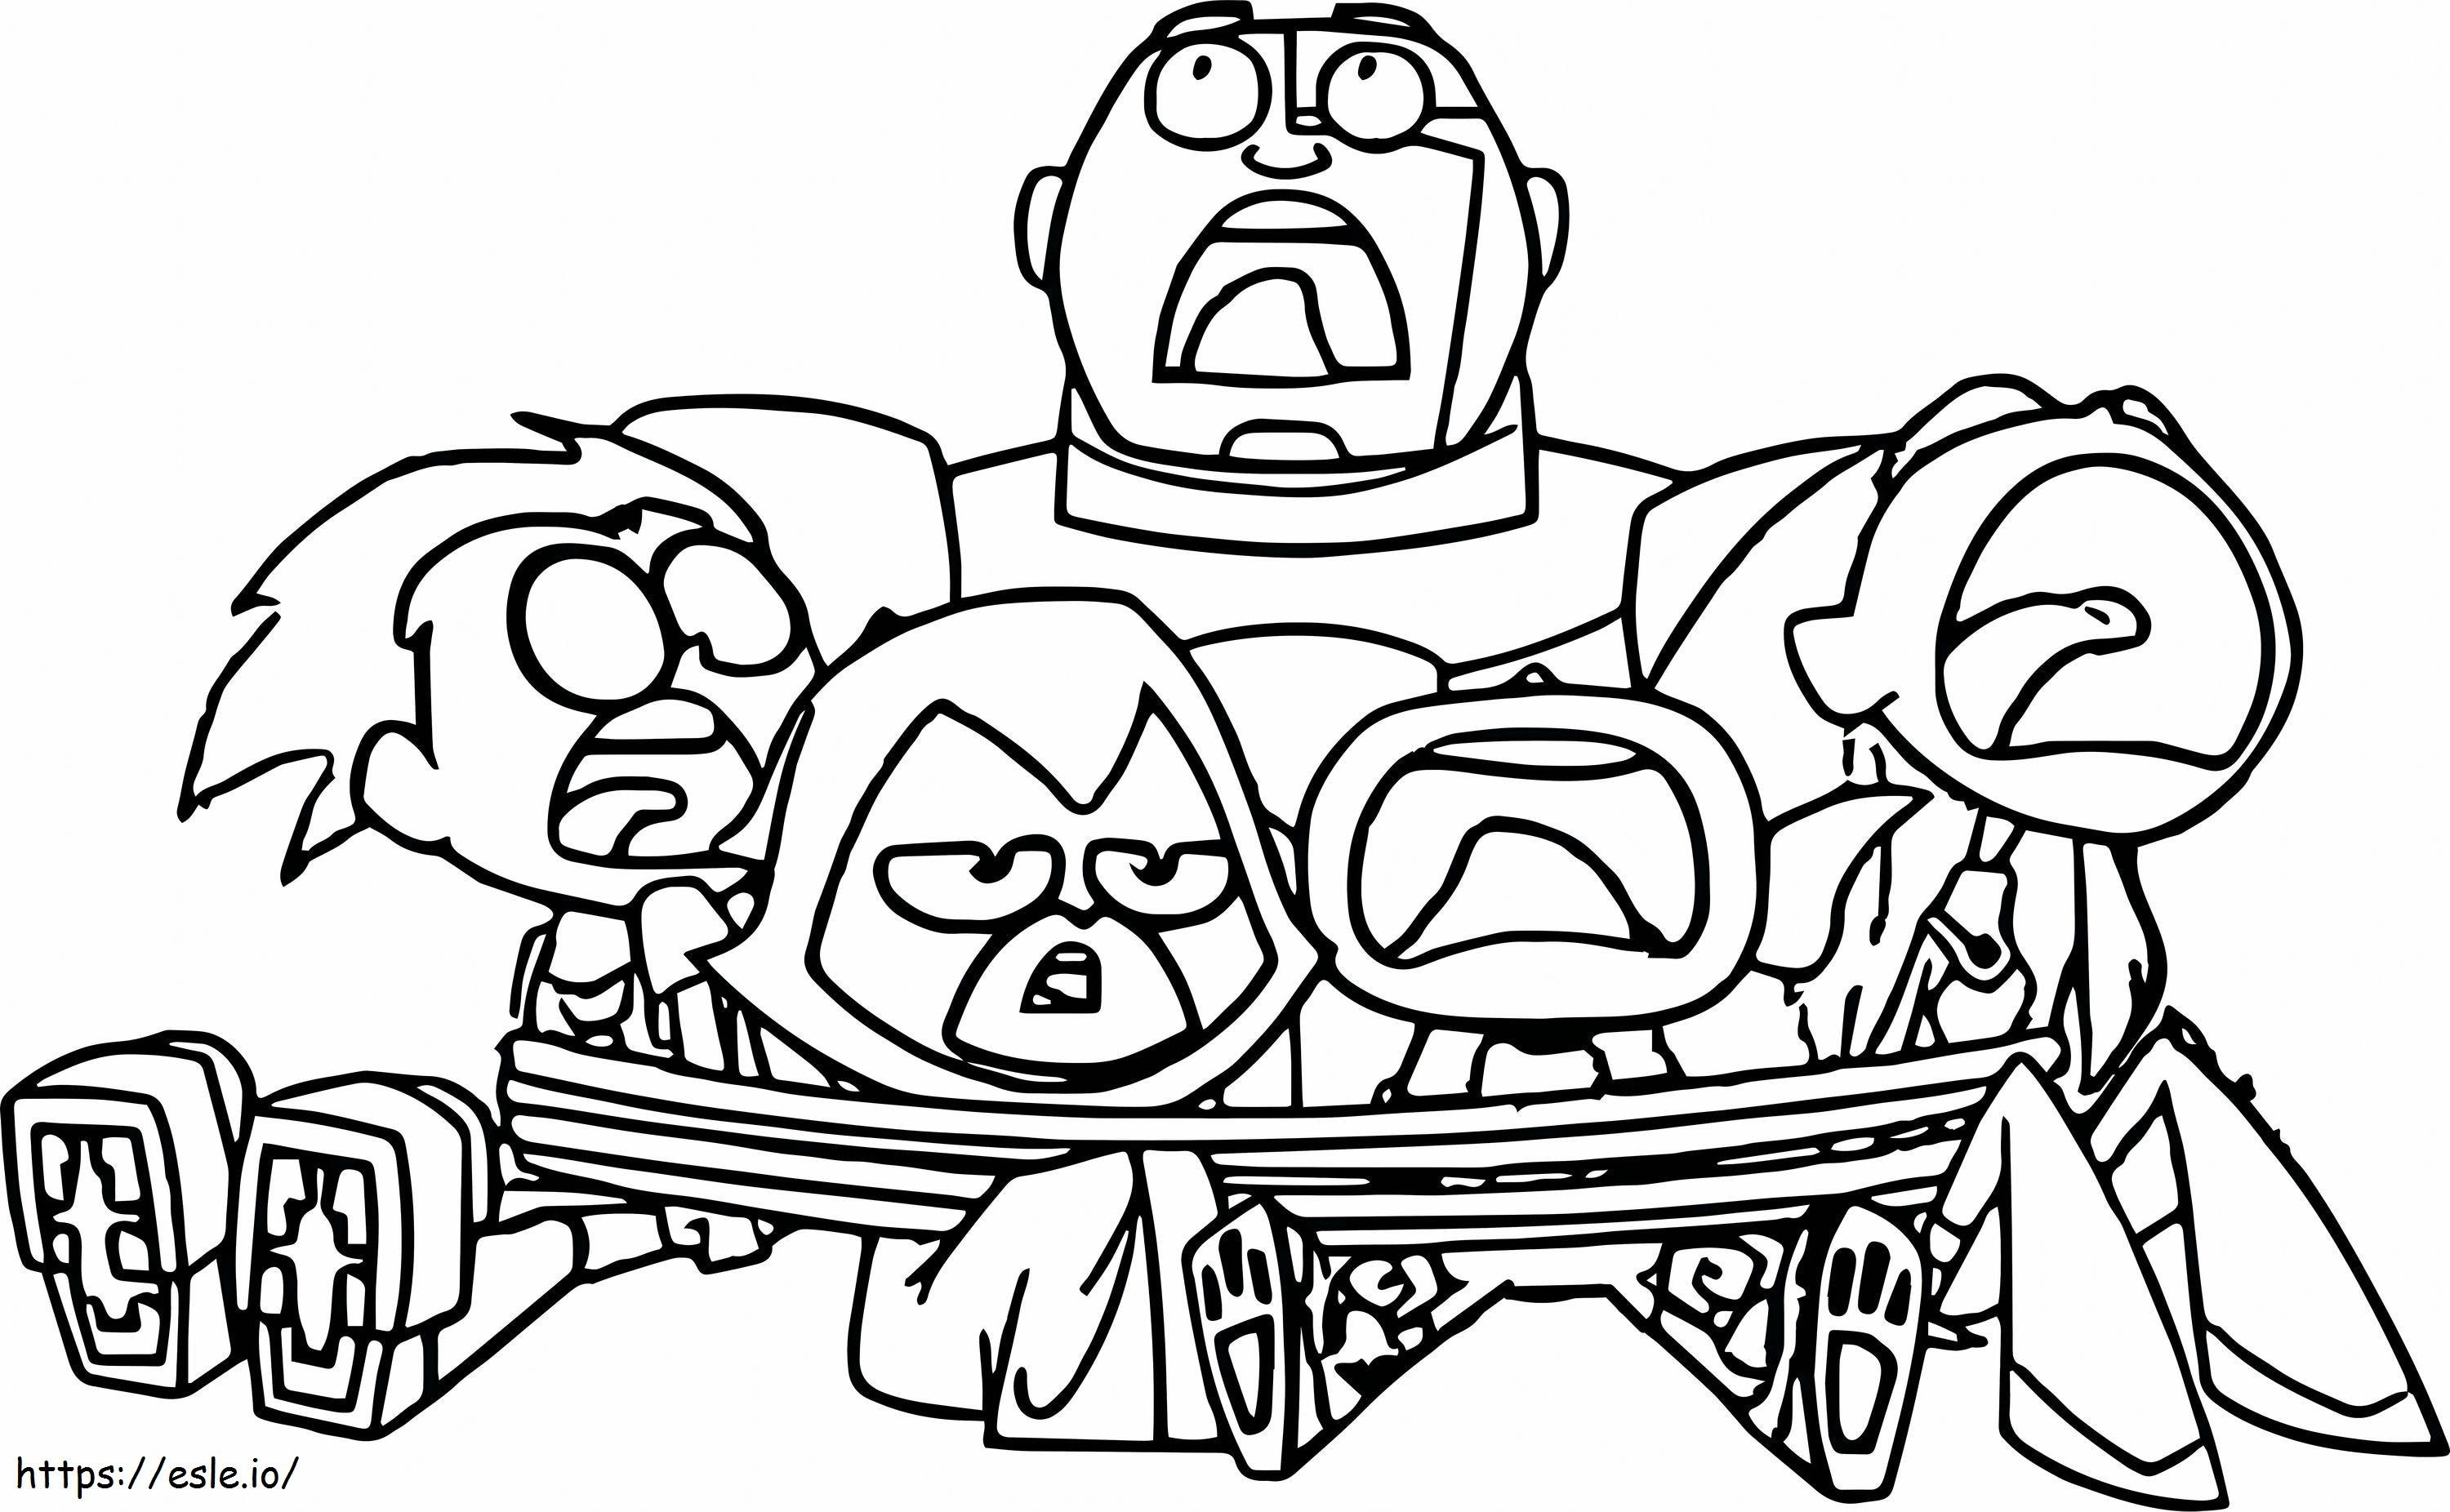 1528100756 Lego Batman 3 Robin Teen Titans Go Team Page In Scaled 2 coloring page